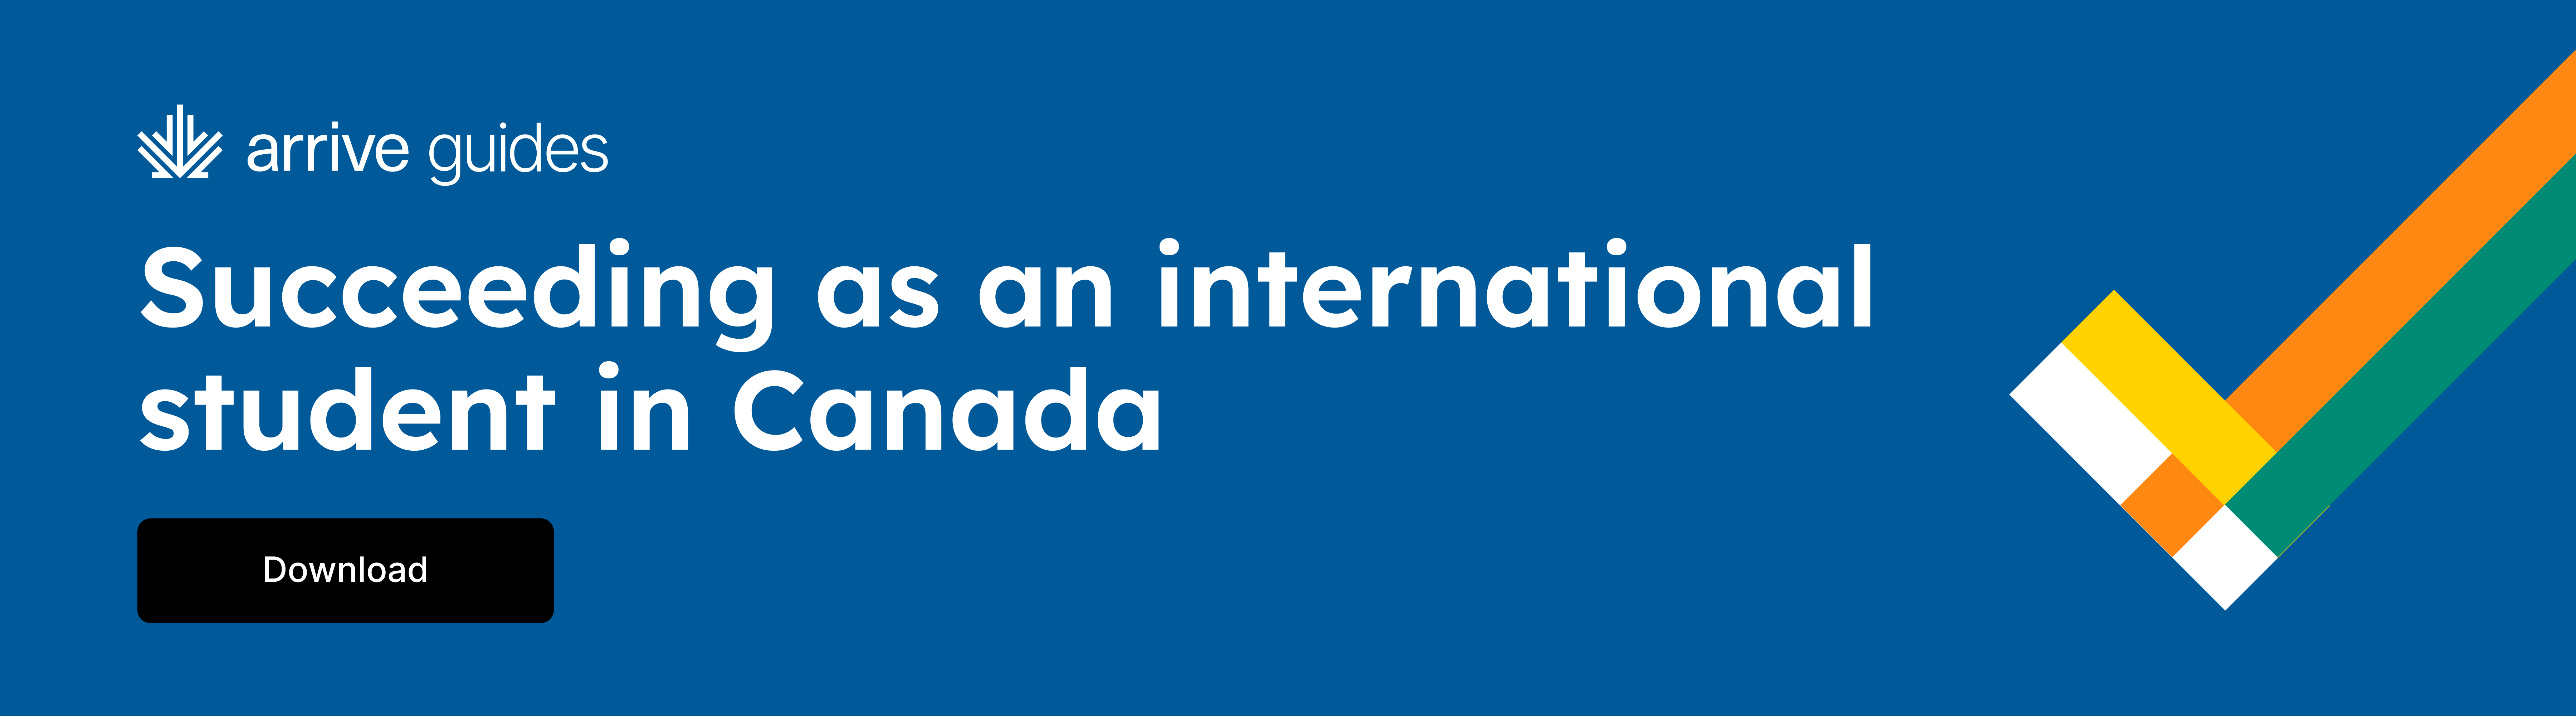 Guide to succeeding as an international student in Canada